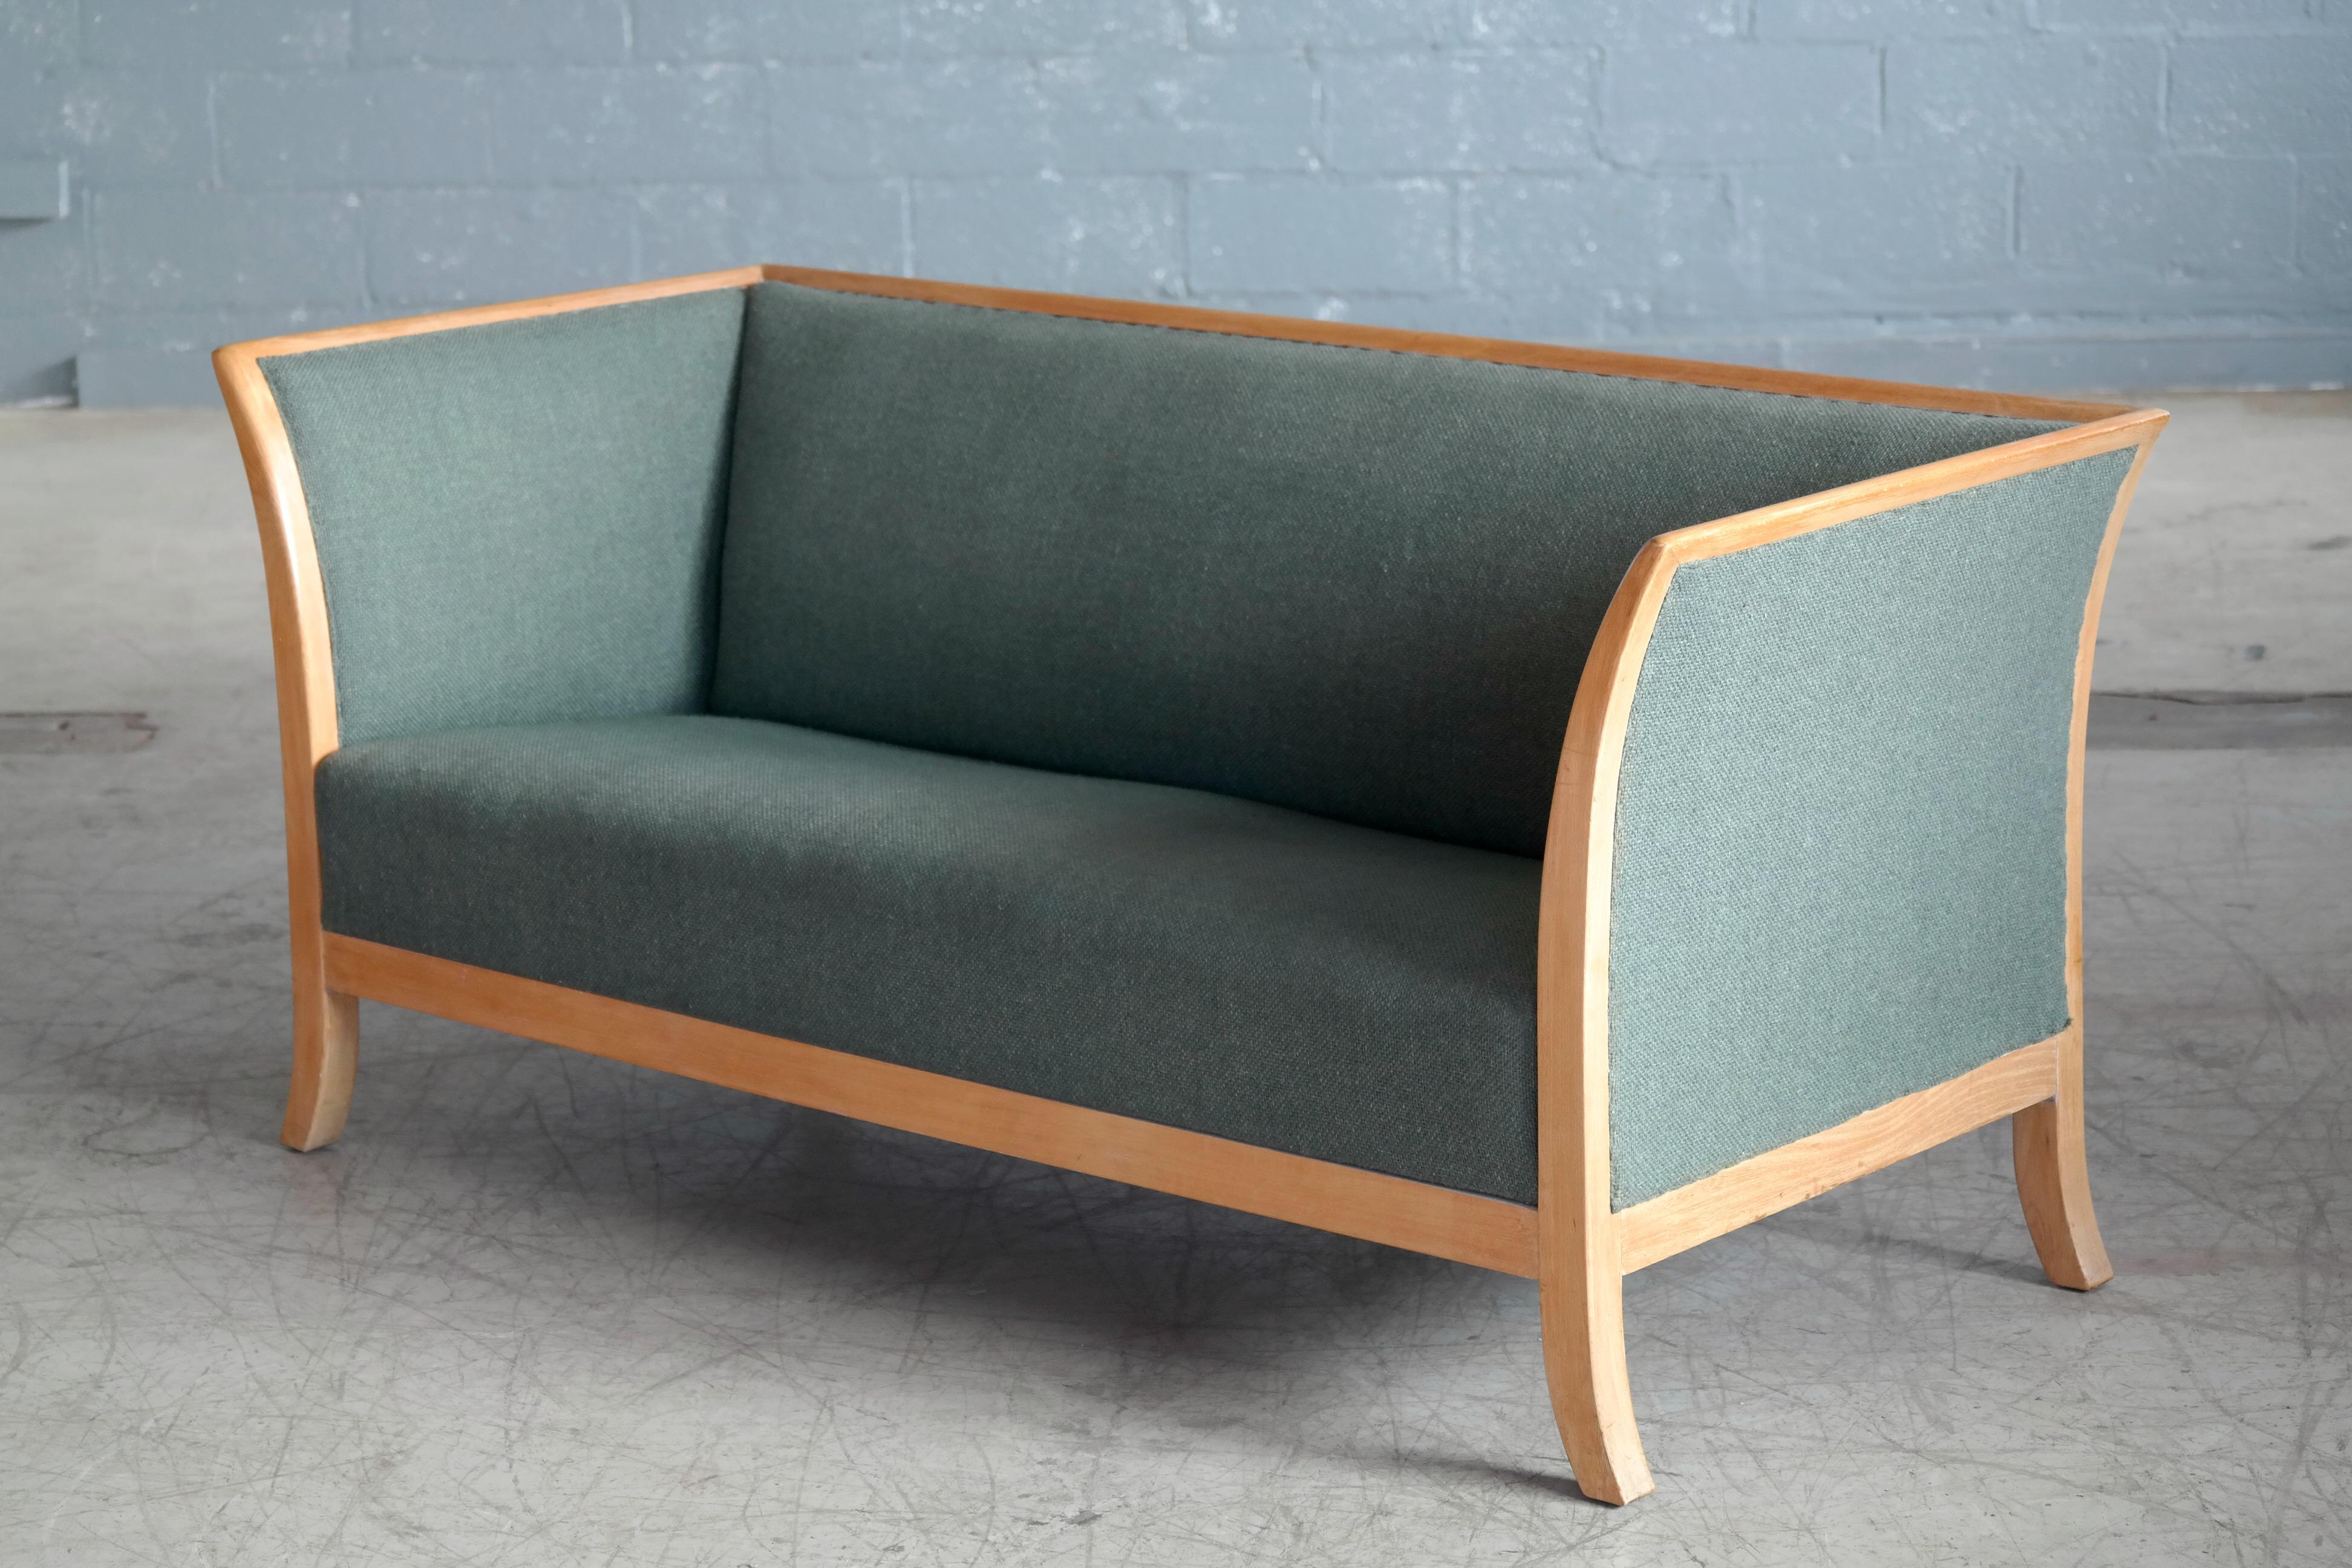 Beautiful and very elegant Frits Henningsen style sofa manufactured and marked with label by Søren Willadsen, Denmark probably sometime in the 1930s-1940s. Framed in oak with the frame extending into flared legs. Later upholstered in sides, seat and